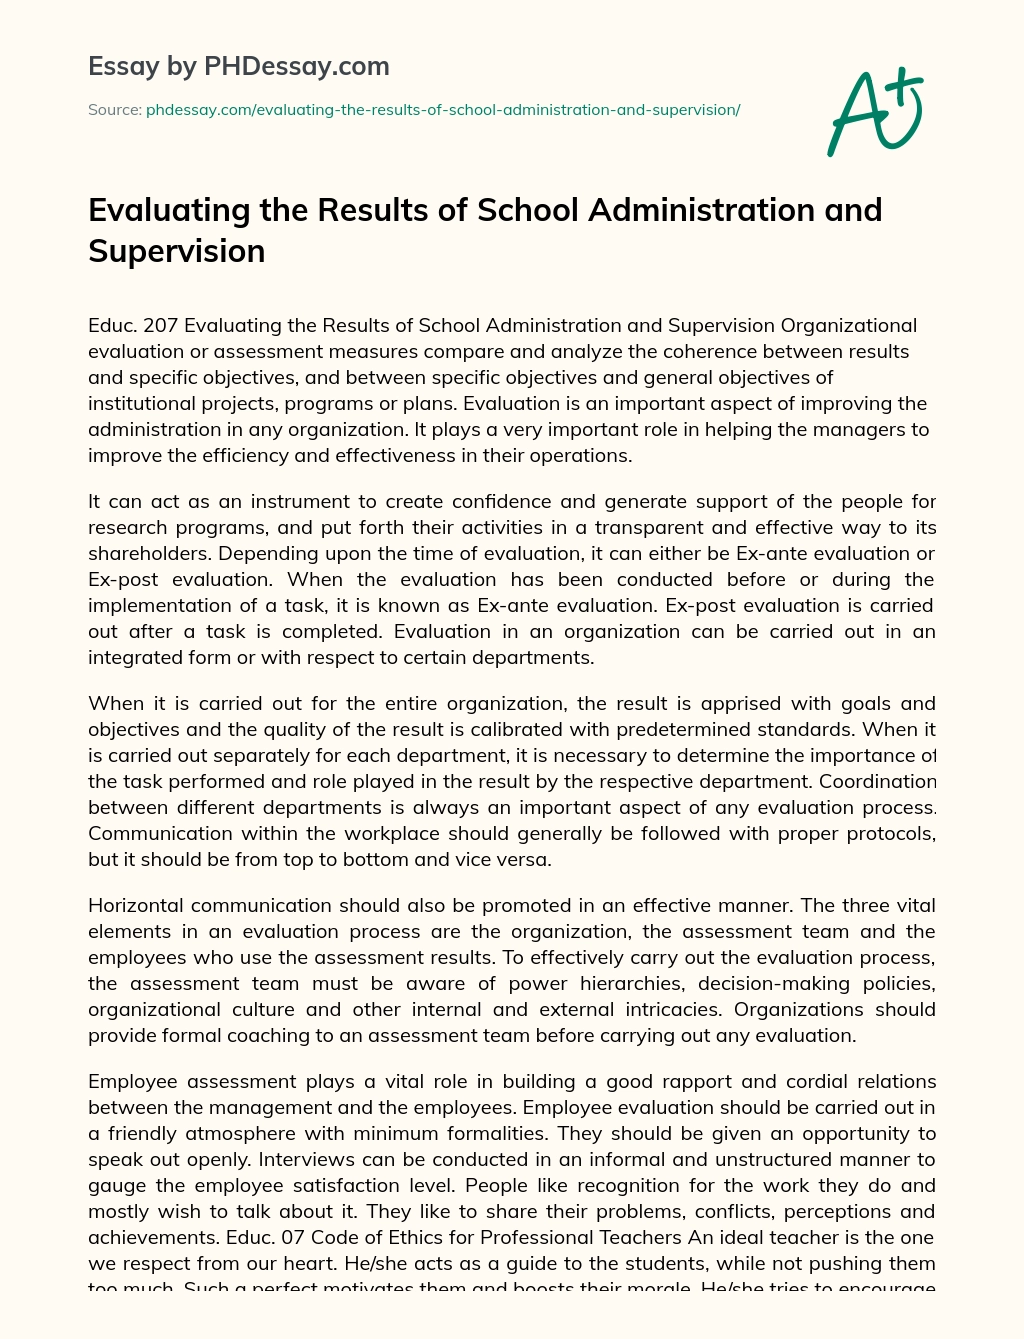 Evaluating the Results of School Administration and Supervision essay